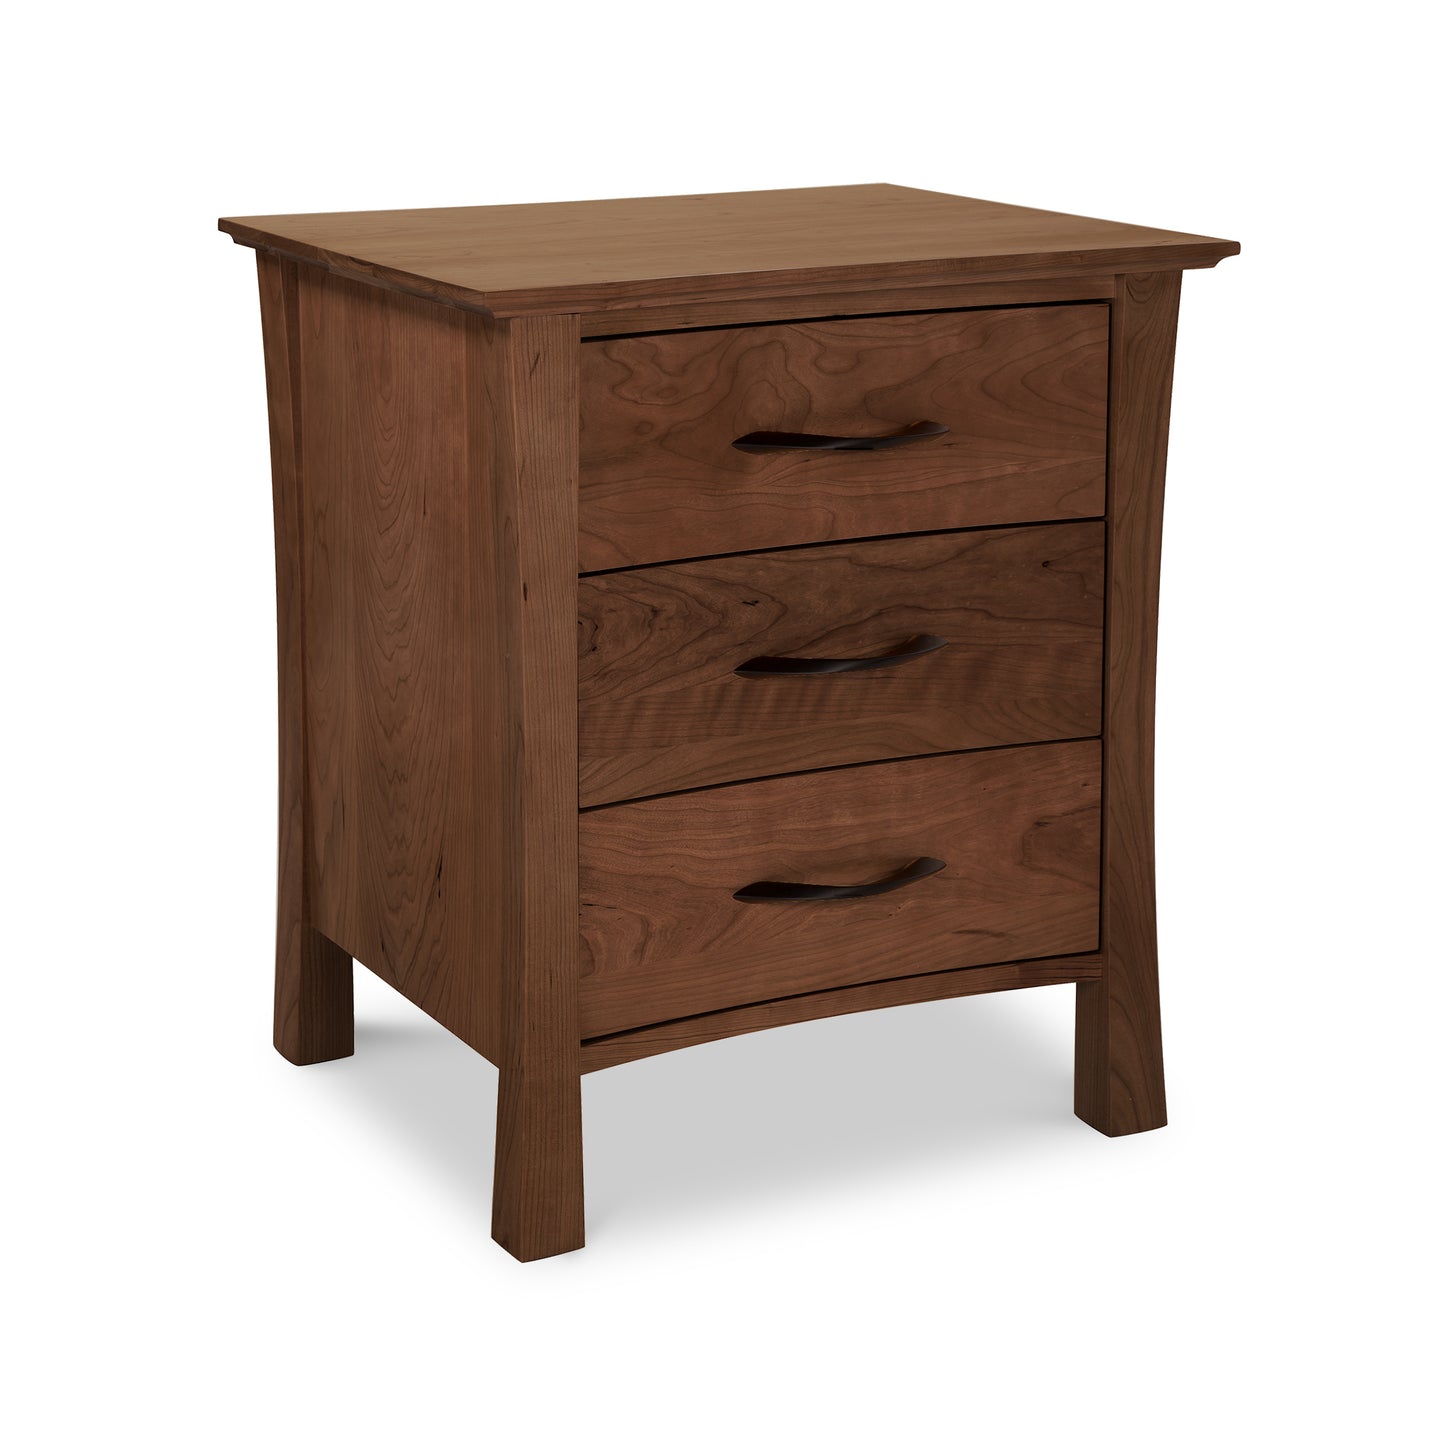 A Green Mountain 3-Drawer Nightstand by Lyndon Furniture on a white background.